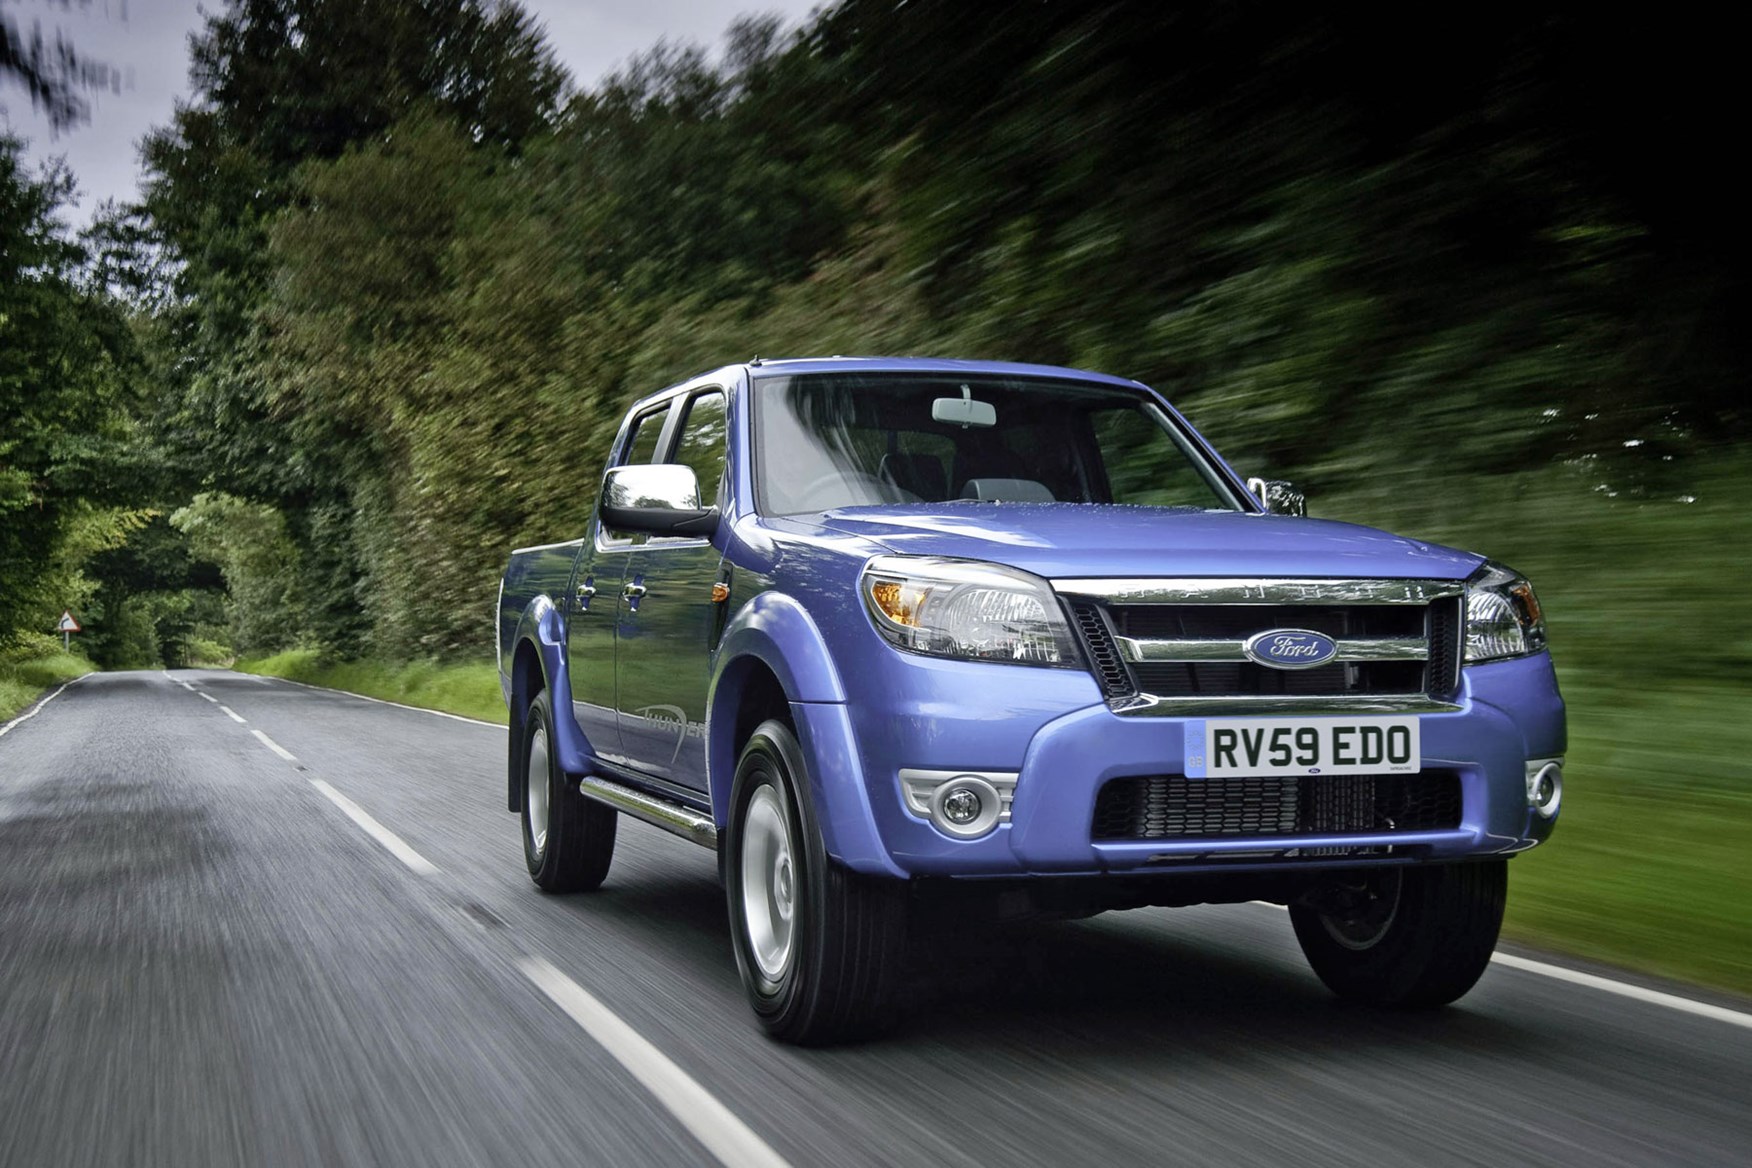 Ford Ranger (2006-2011) driving experience